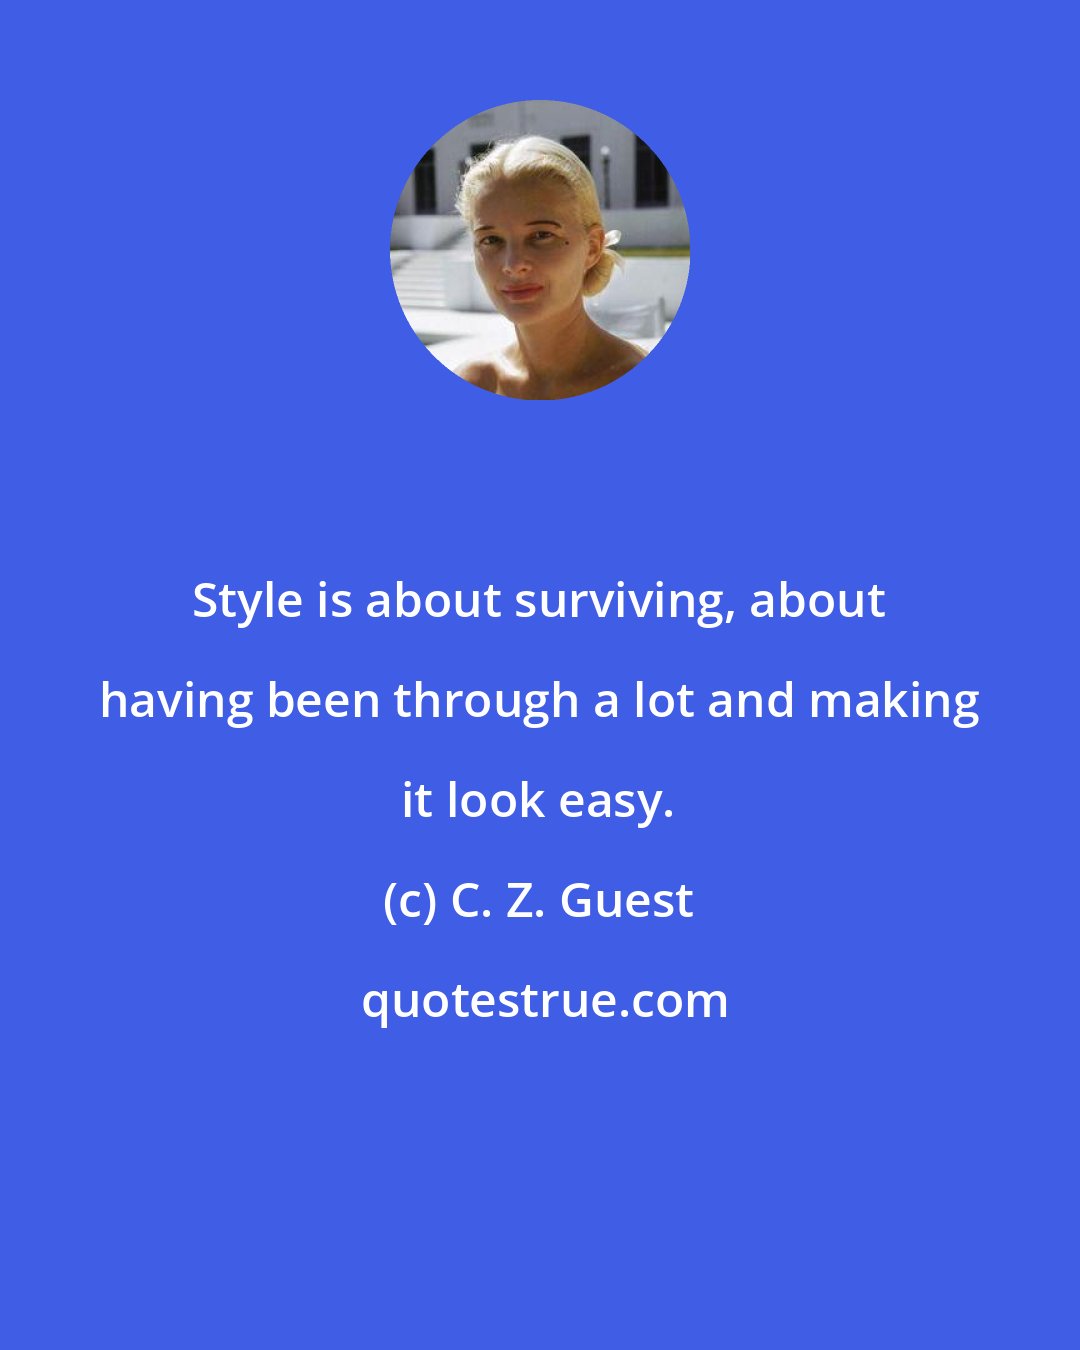 C. Z. Guest: Style is about surviving, about having been through a lot and making it look easy.